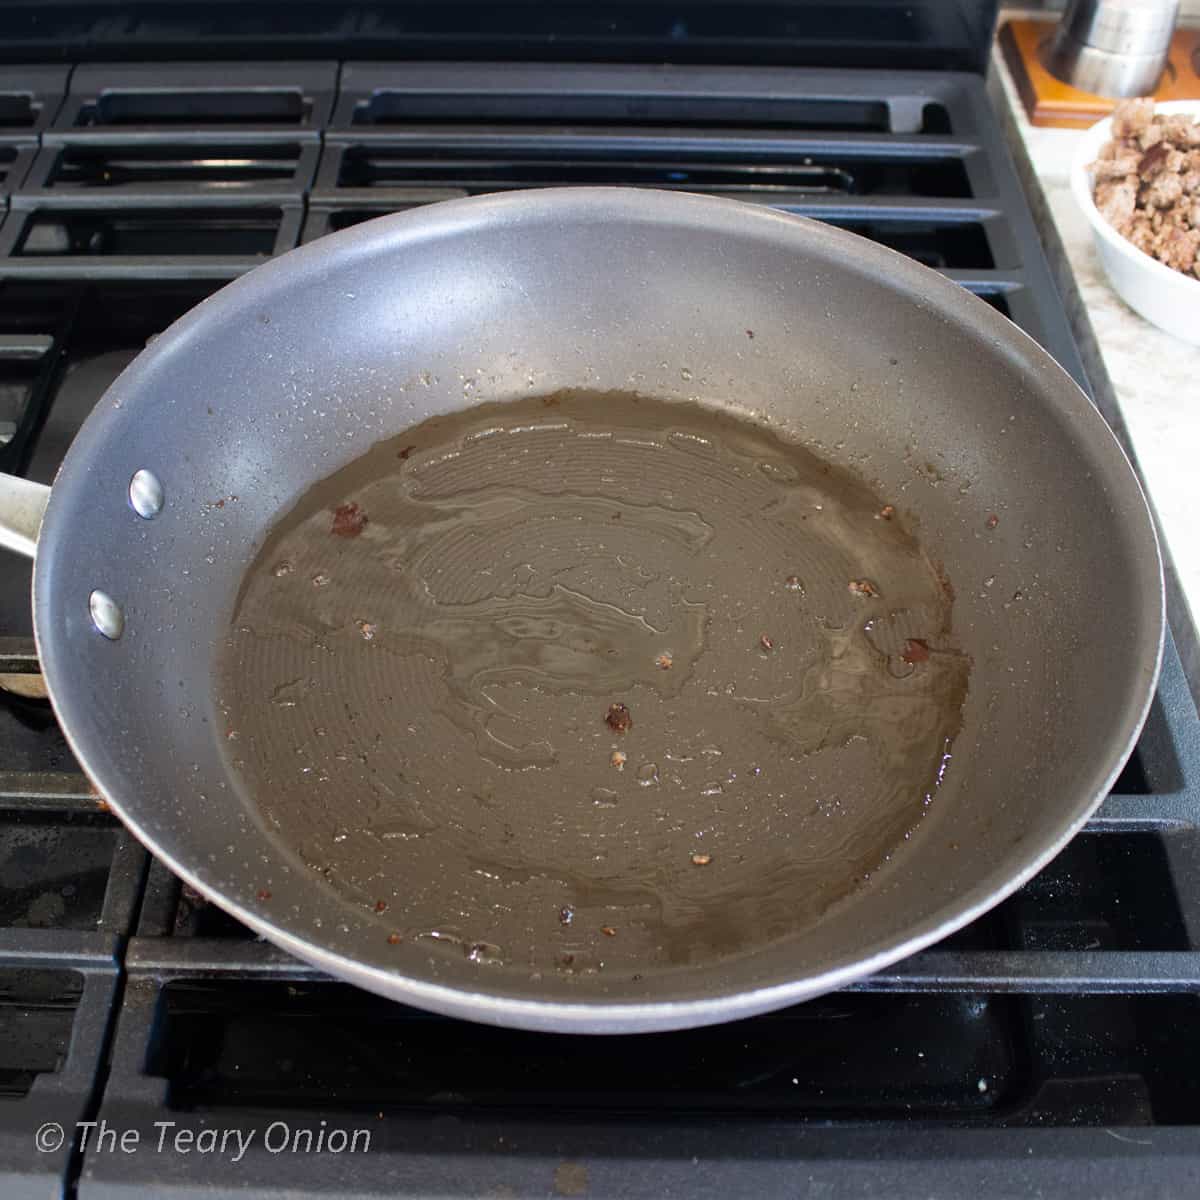 A frying pan with a coating of beef fat in the bottom.